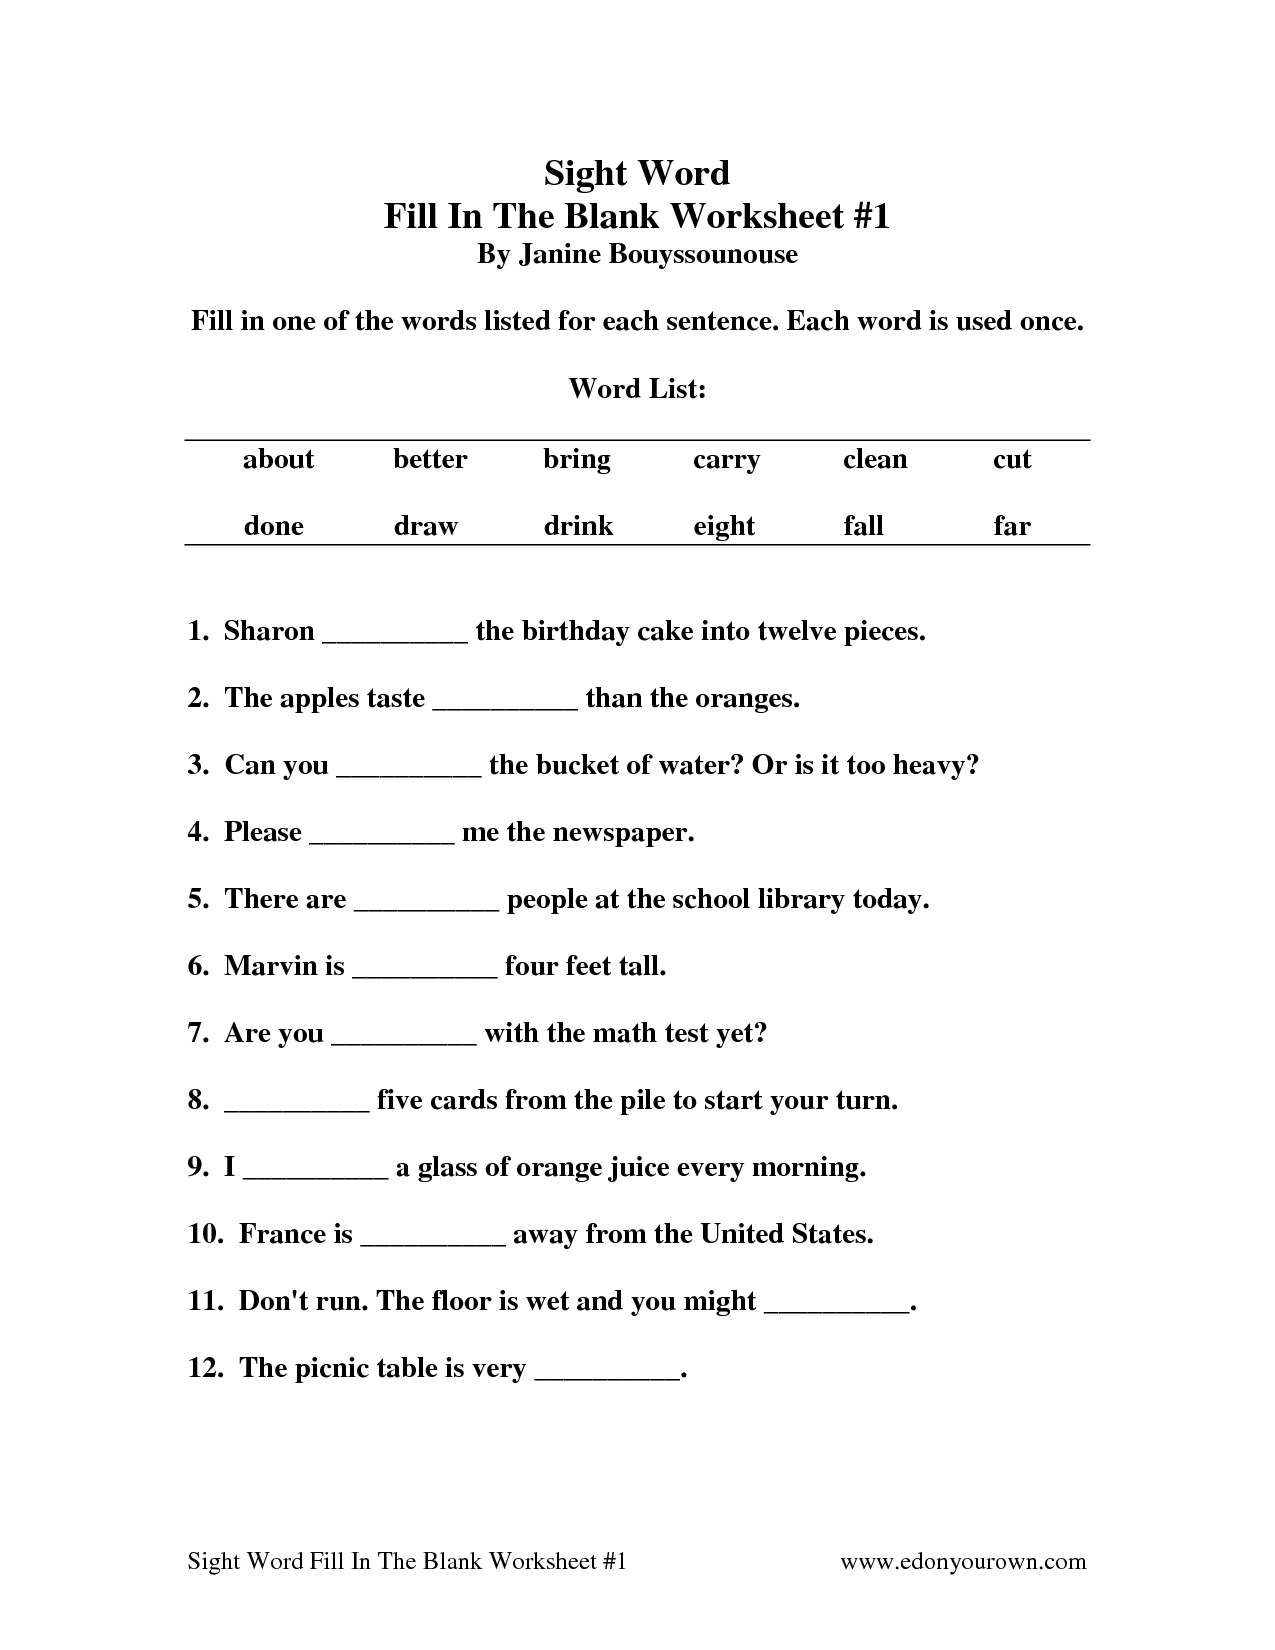 Sentences Fill In The Blank Worksheets